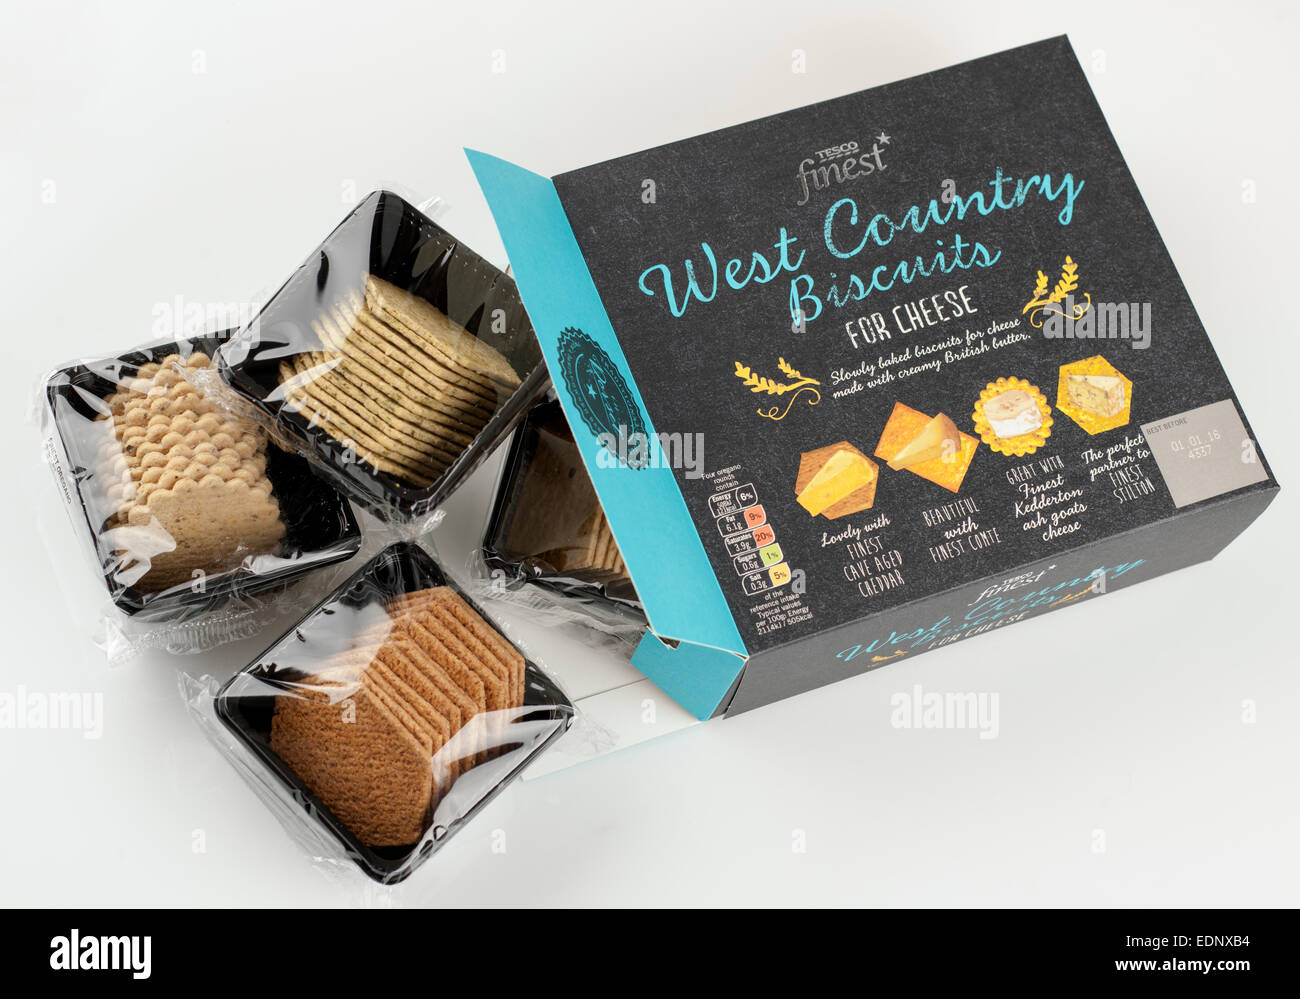 Box of Tesco finest west country biscuits for cheese Stock Photo